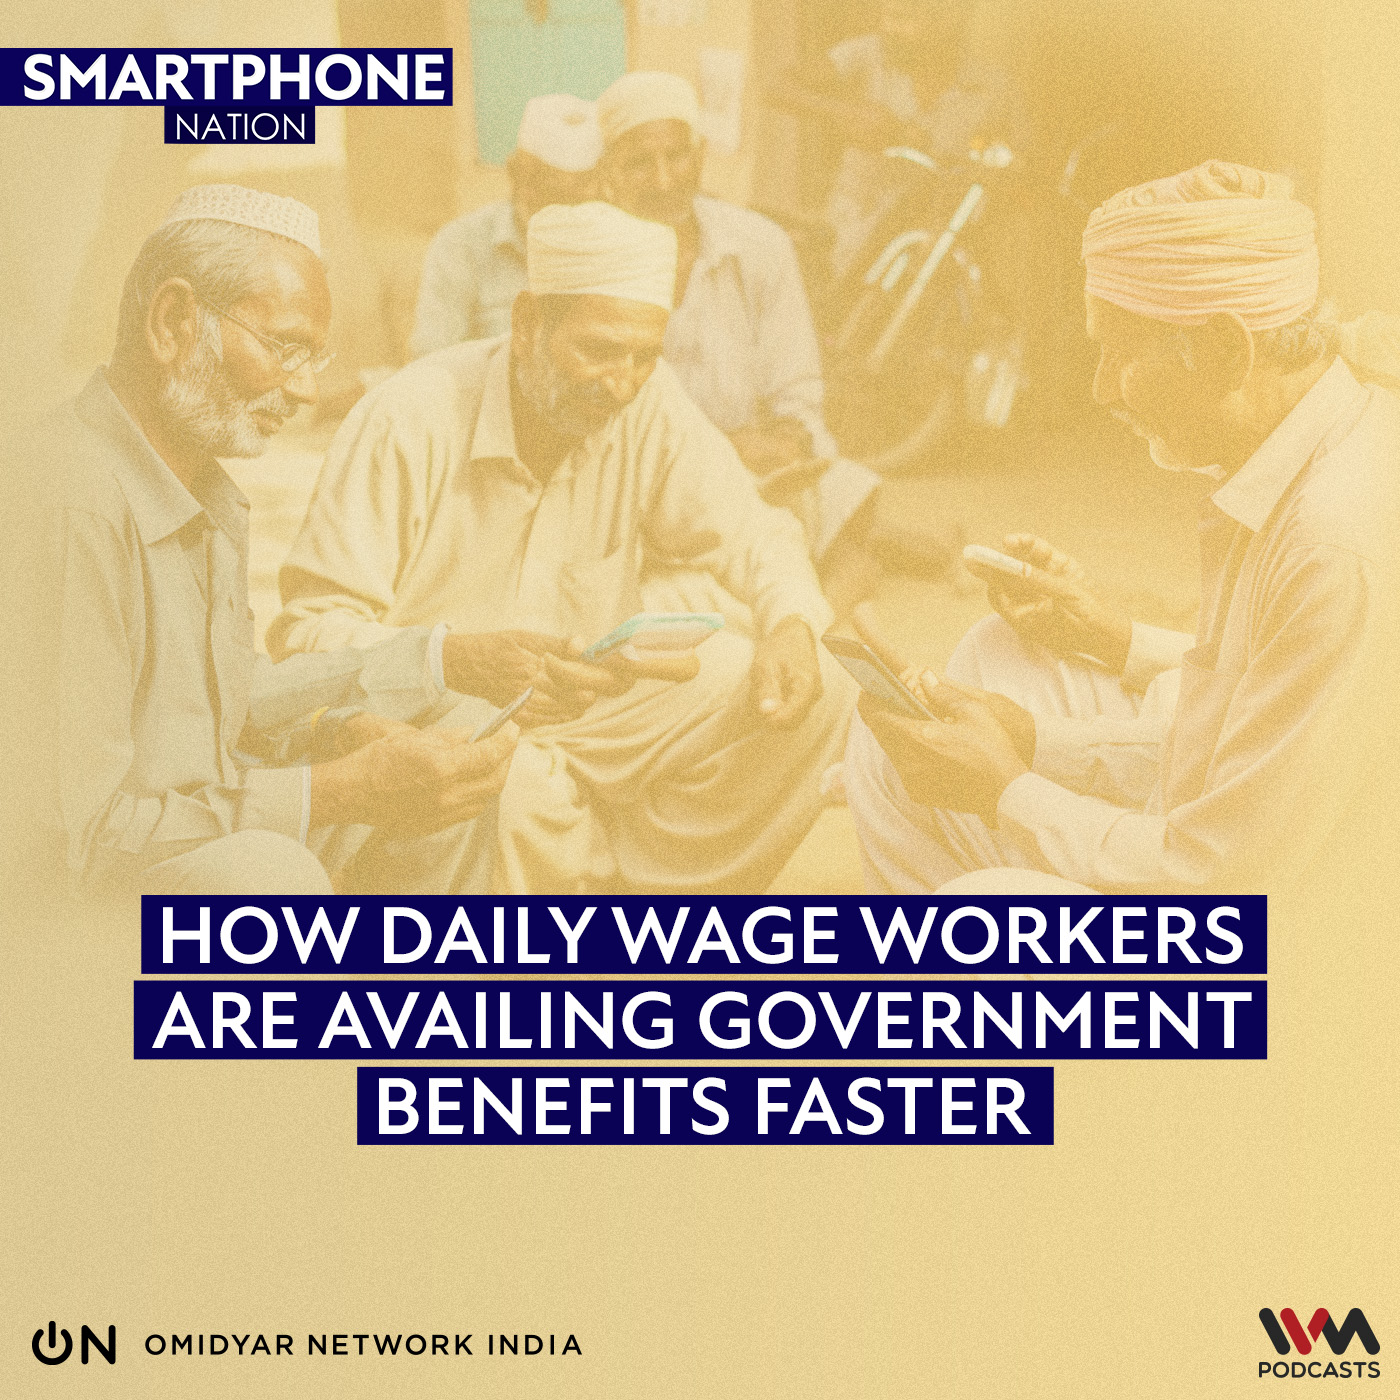 How Daily Wage Workers are Availing Government Benefits Faster